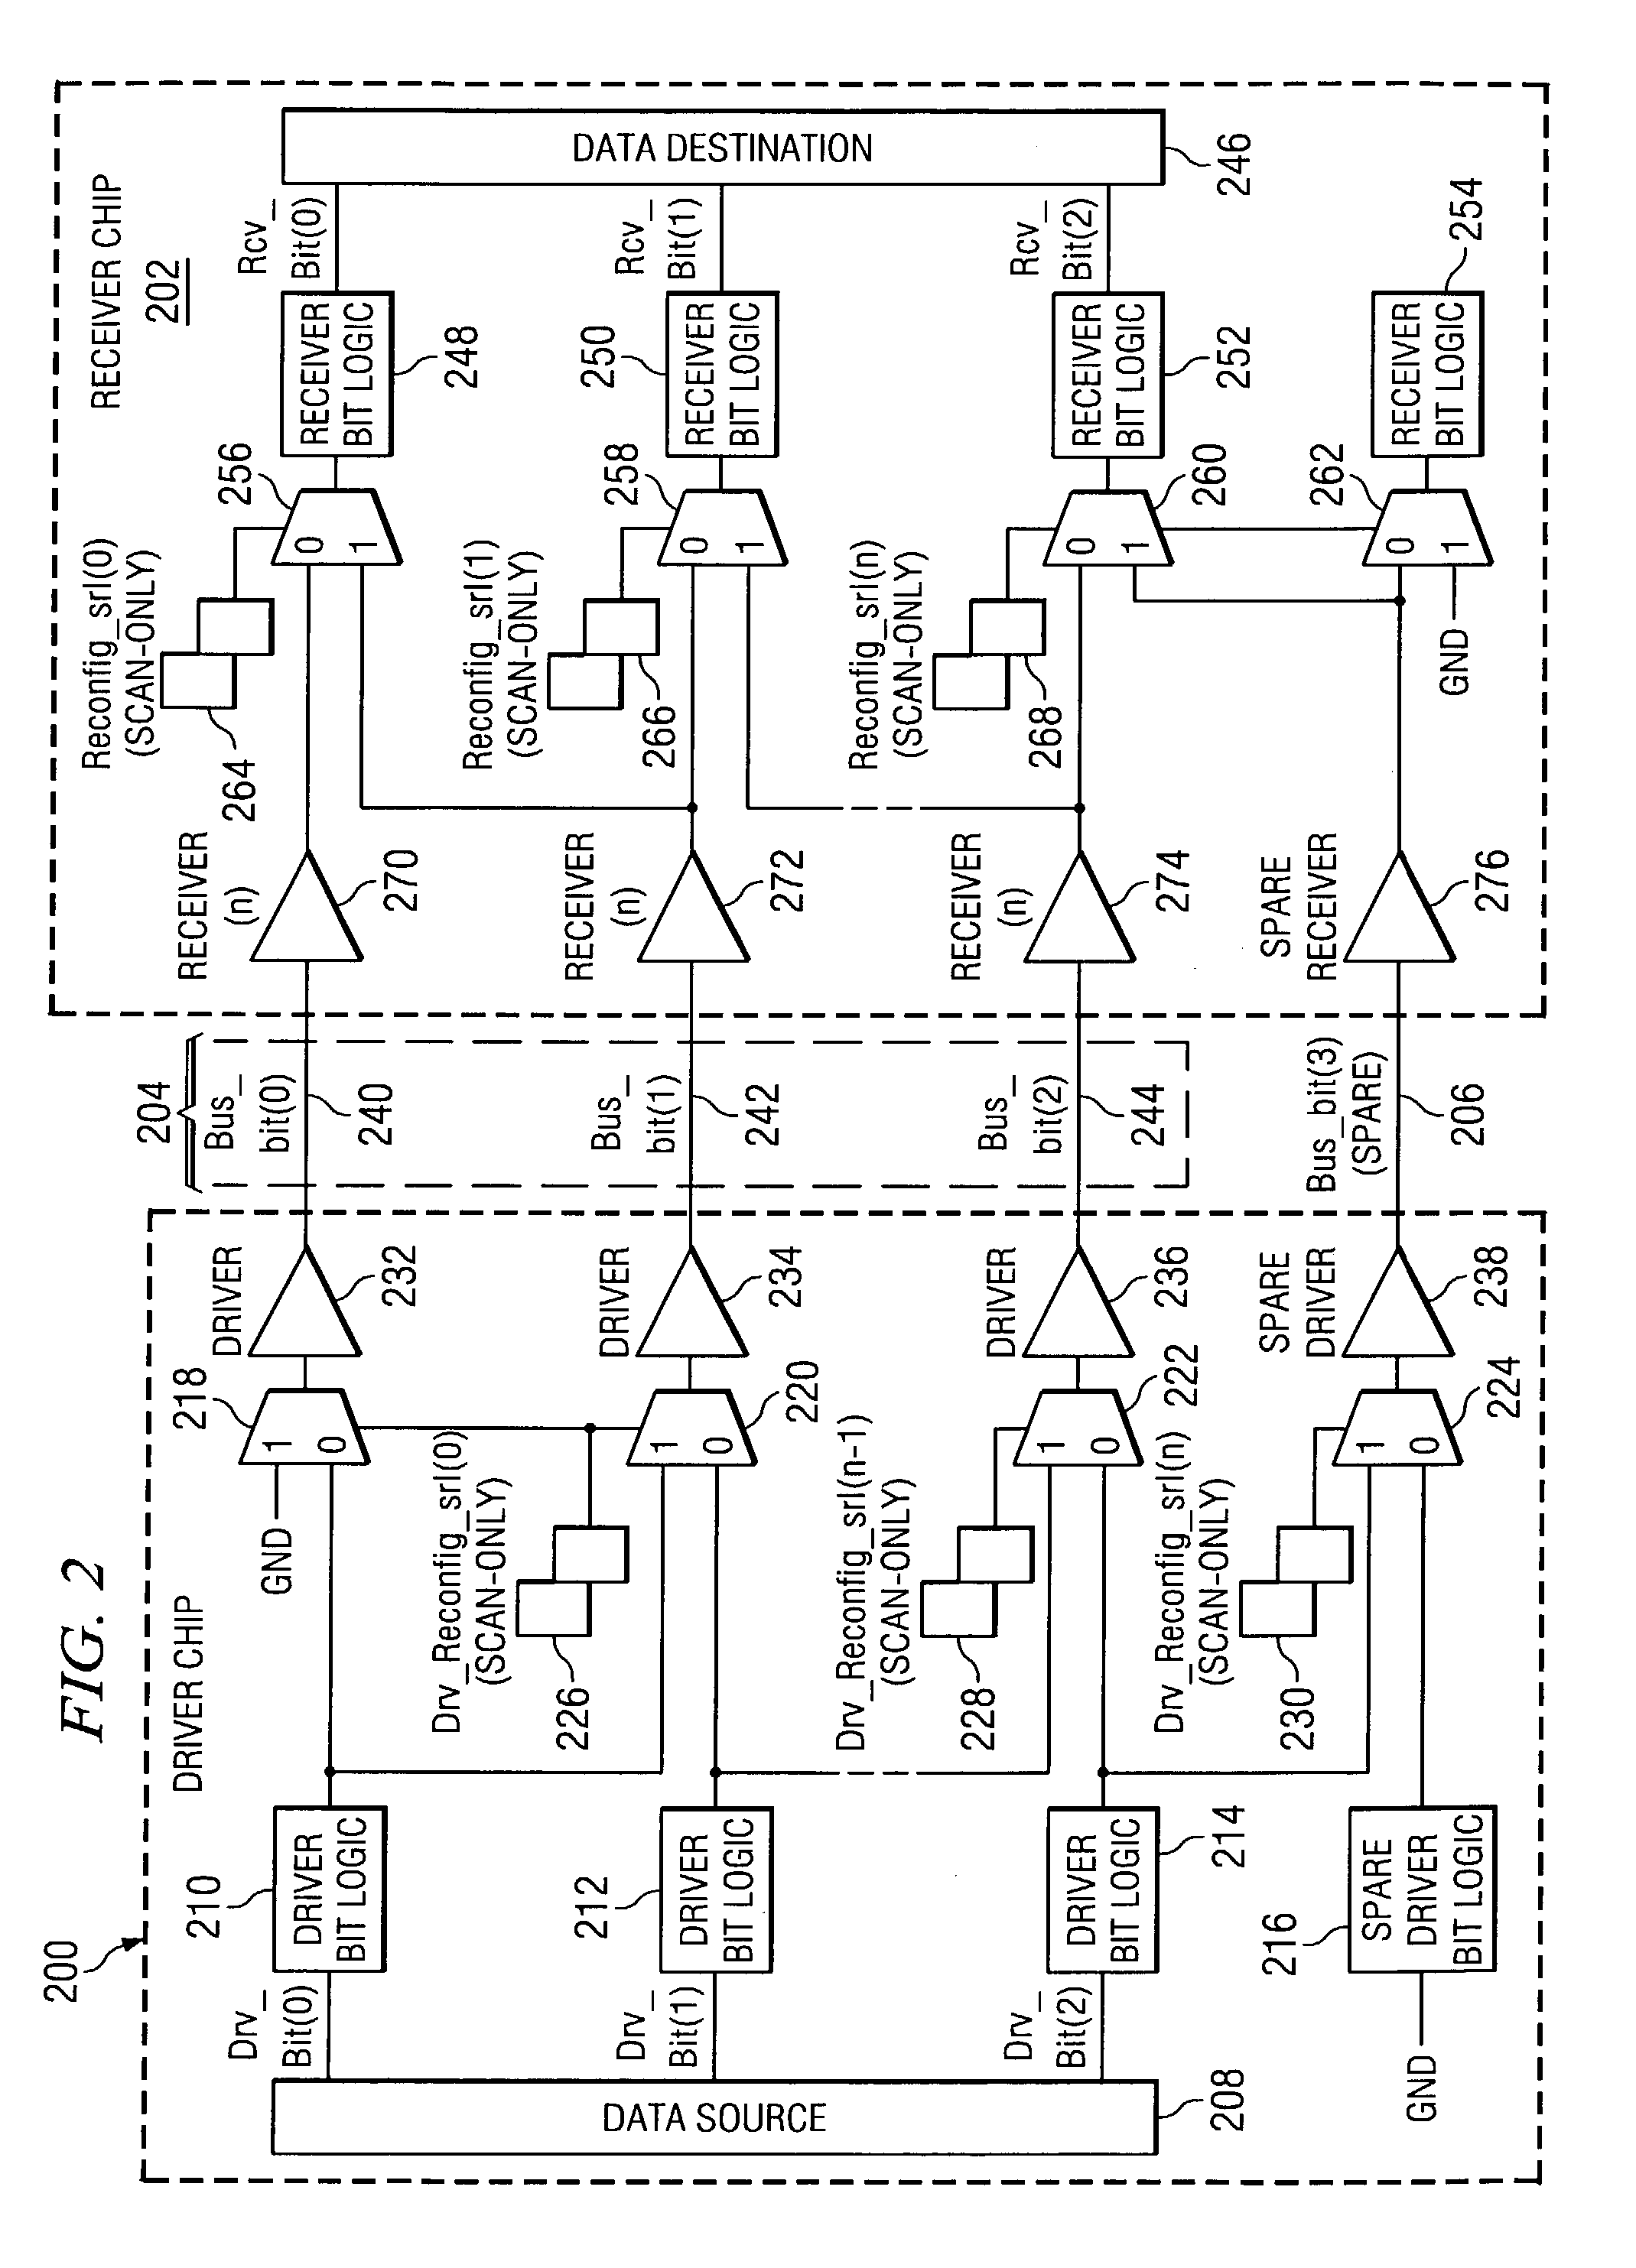 Self-healing chip-to-chip interface